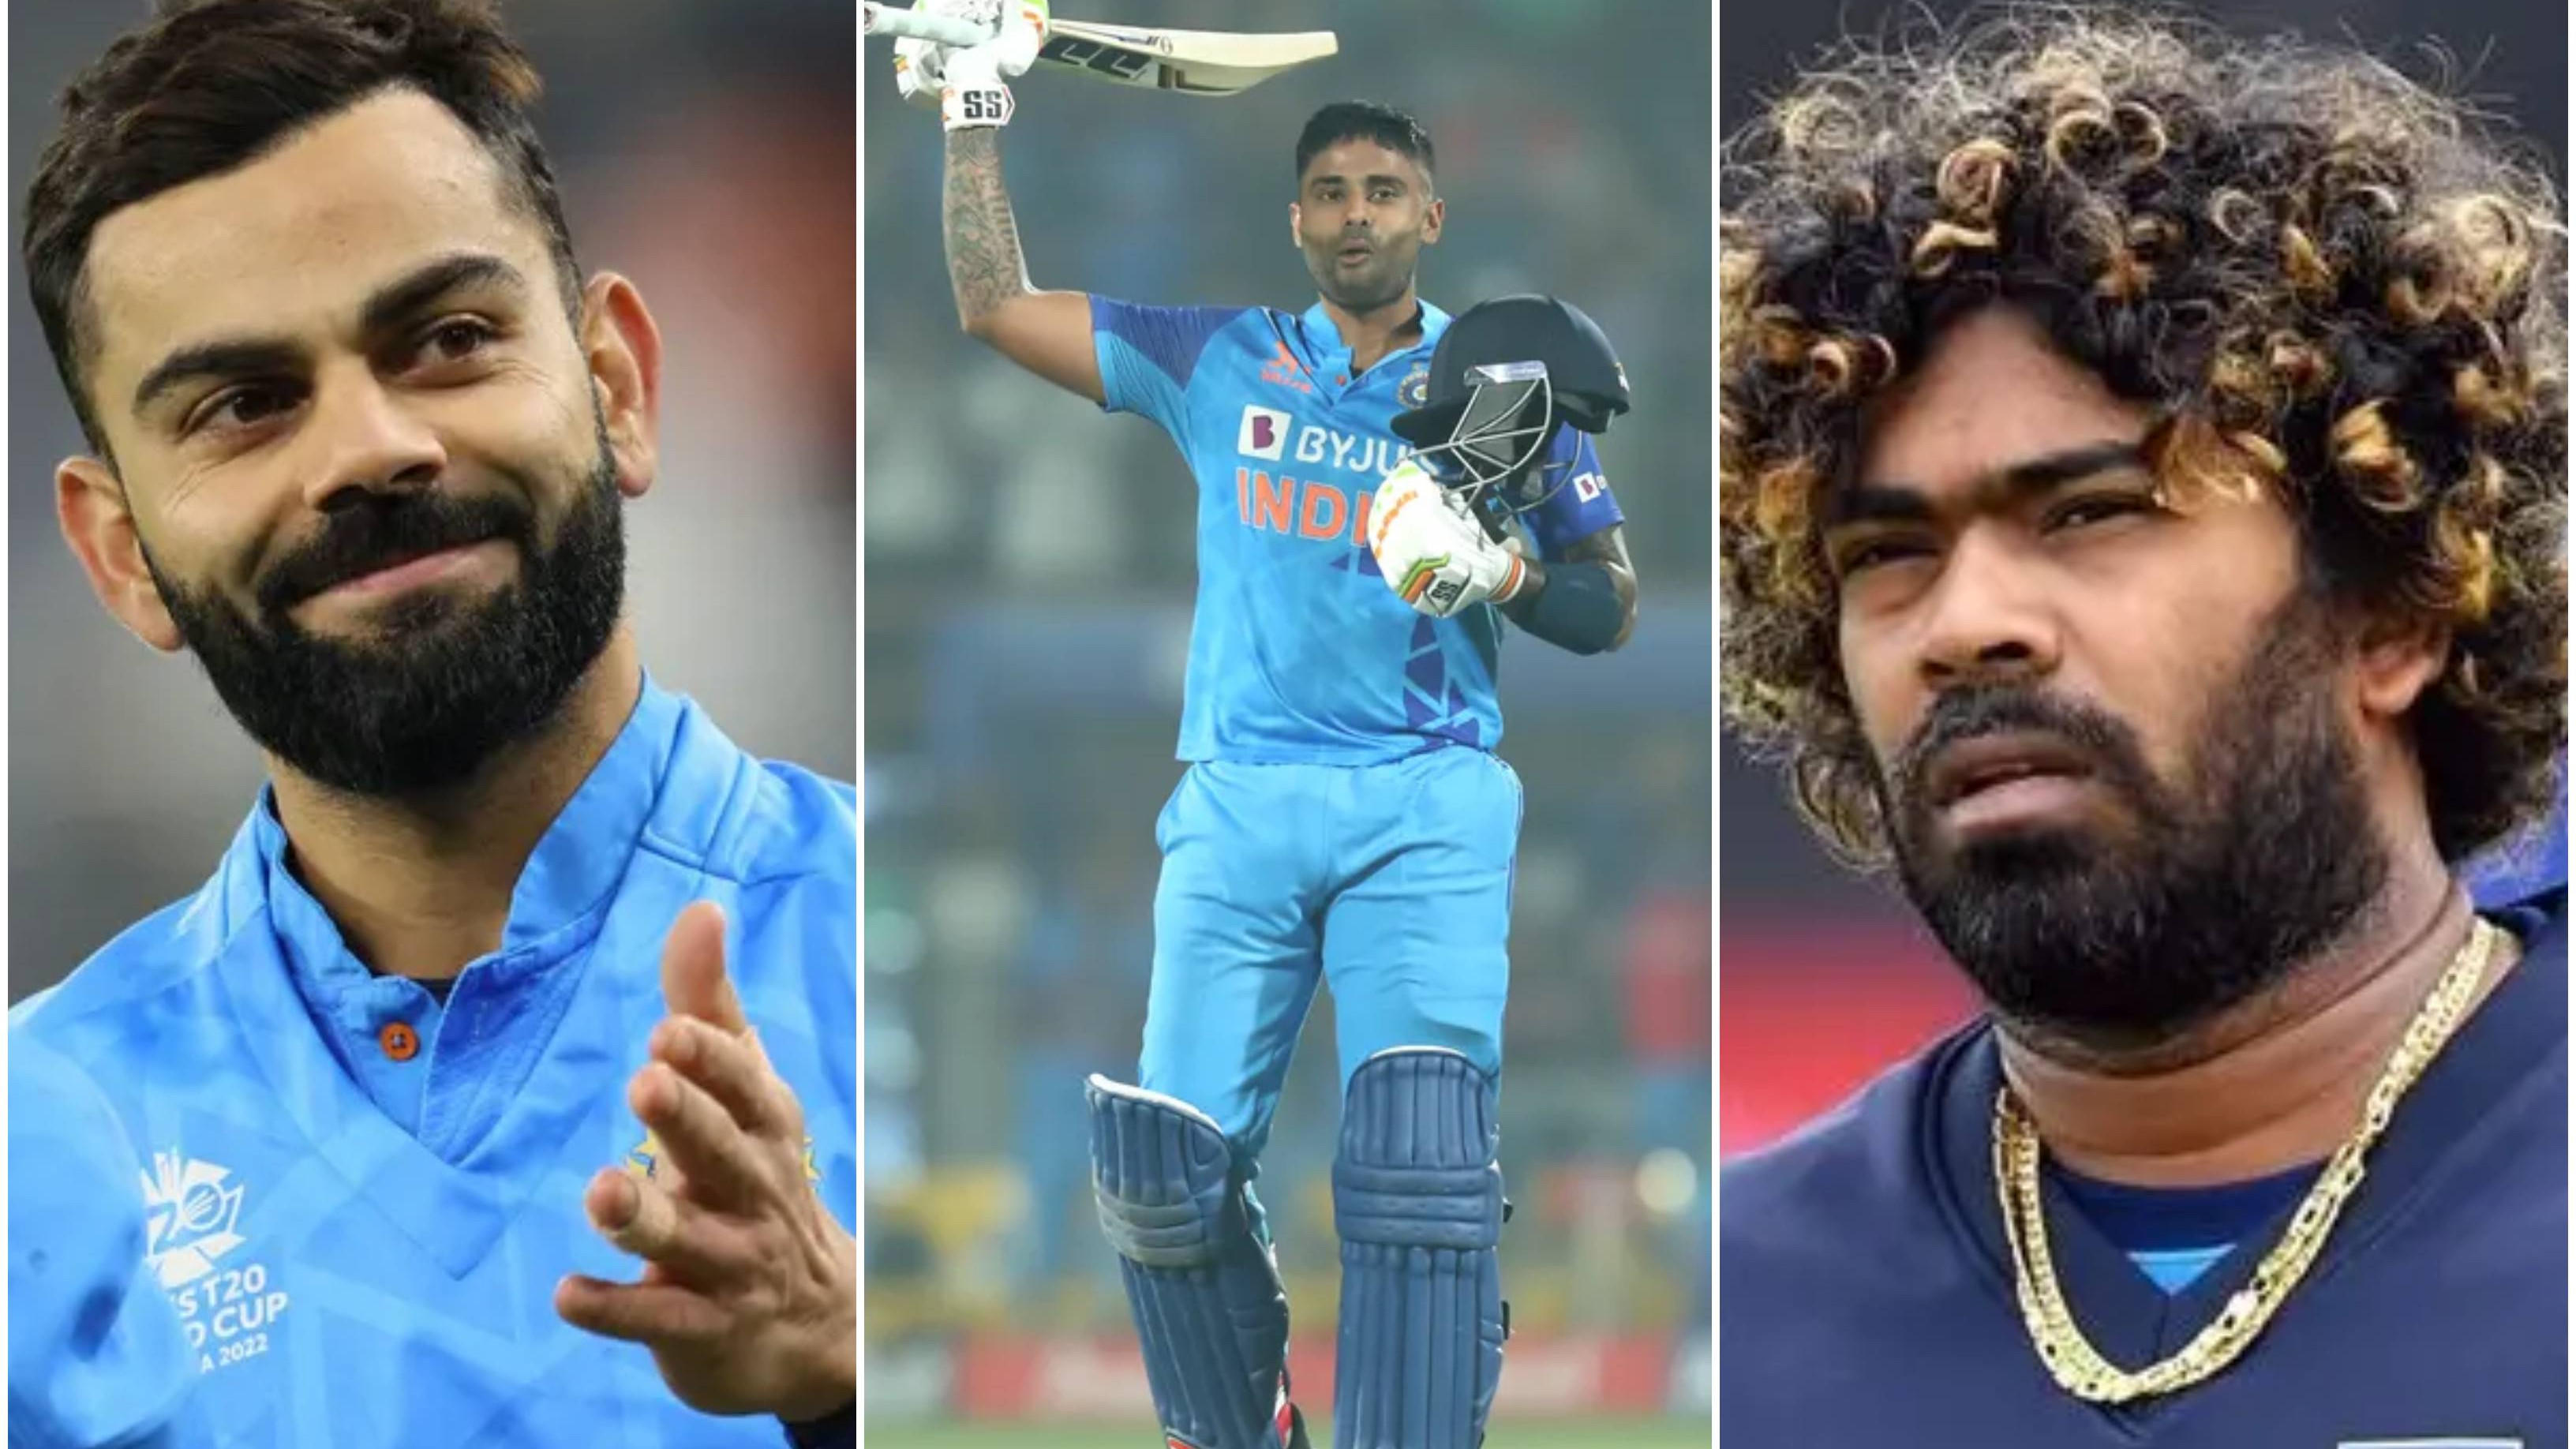 IND v SL 2023: Cricket fraternity reacts in awe as Suryakumar Yadav’s breathtaking 112* takes India to 228/5 in 3rd T20I